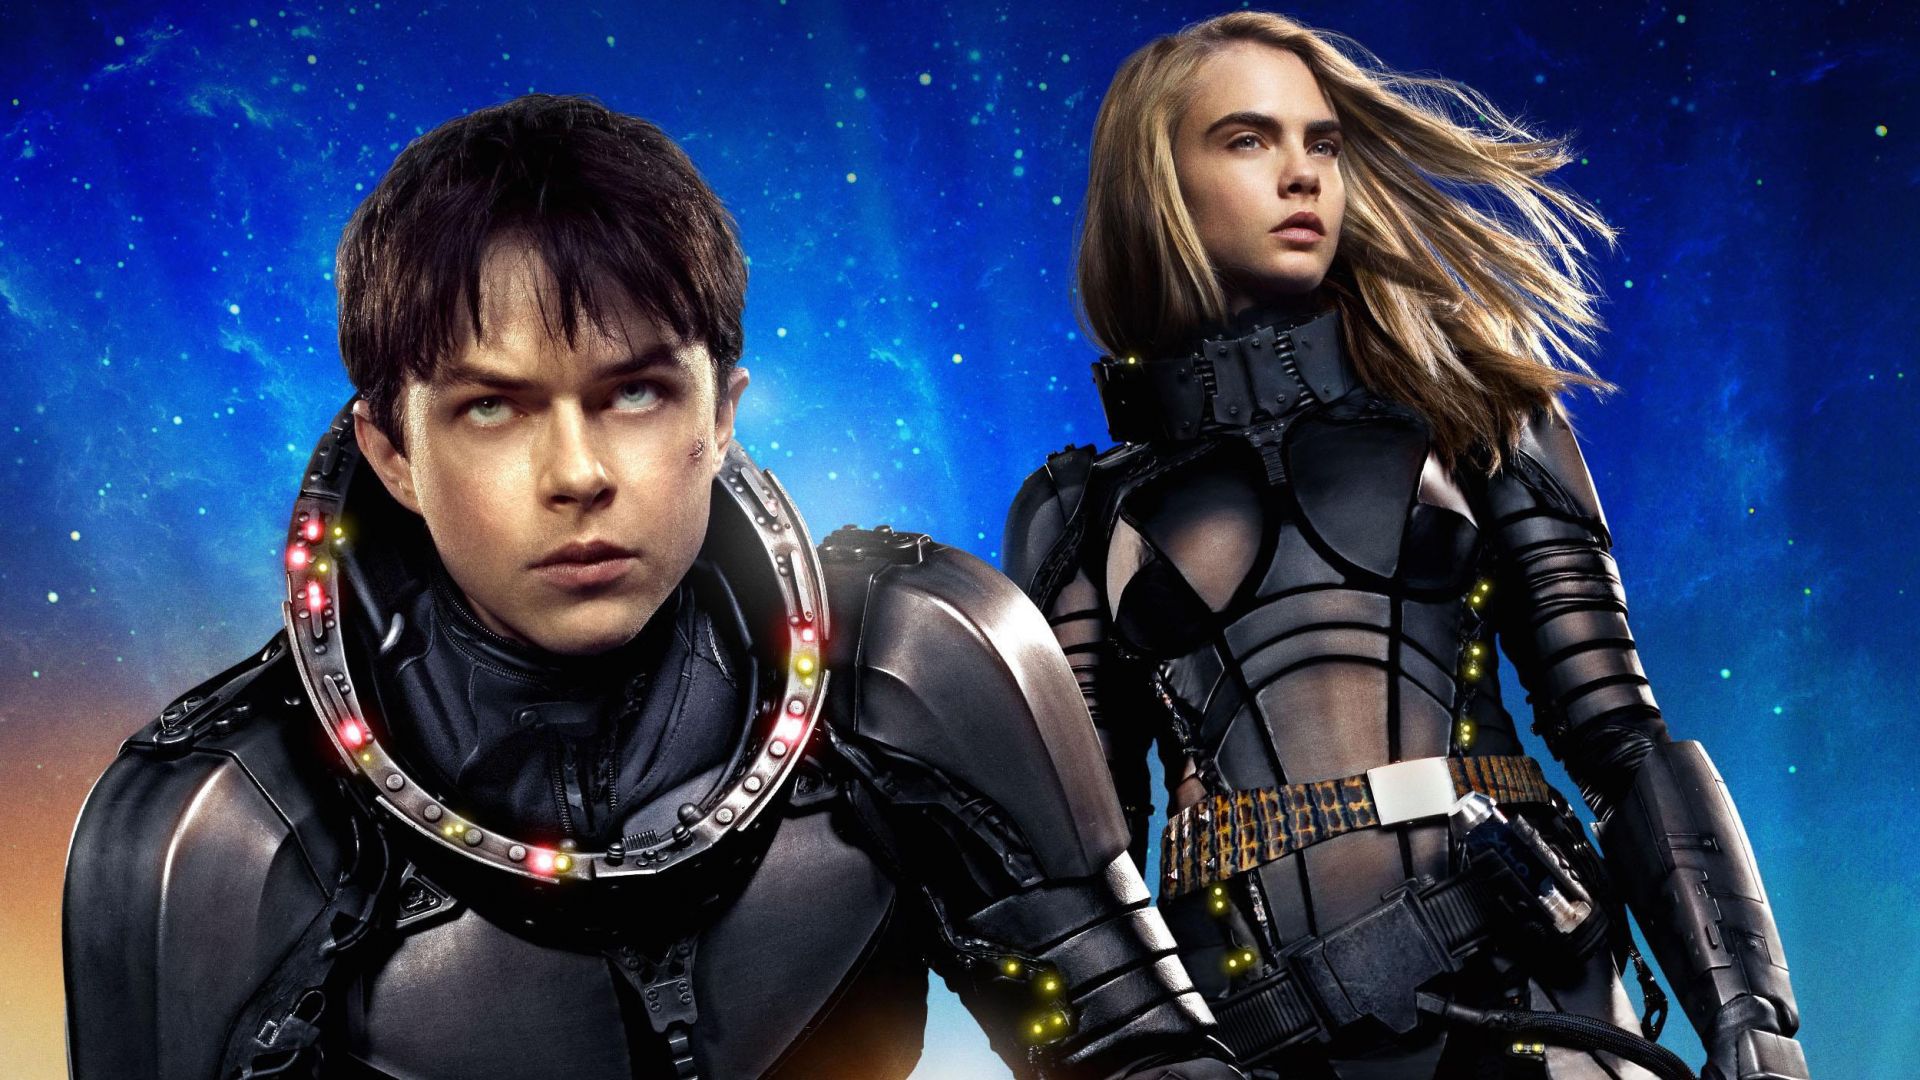 Wallpaper Valerian and the City of a Thousand Planets, 2017 movie, movie, Cara Delevingne, Dane DeHaan